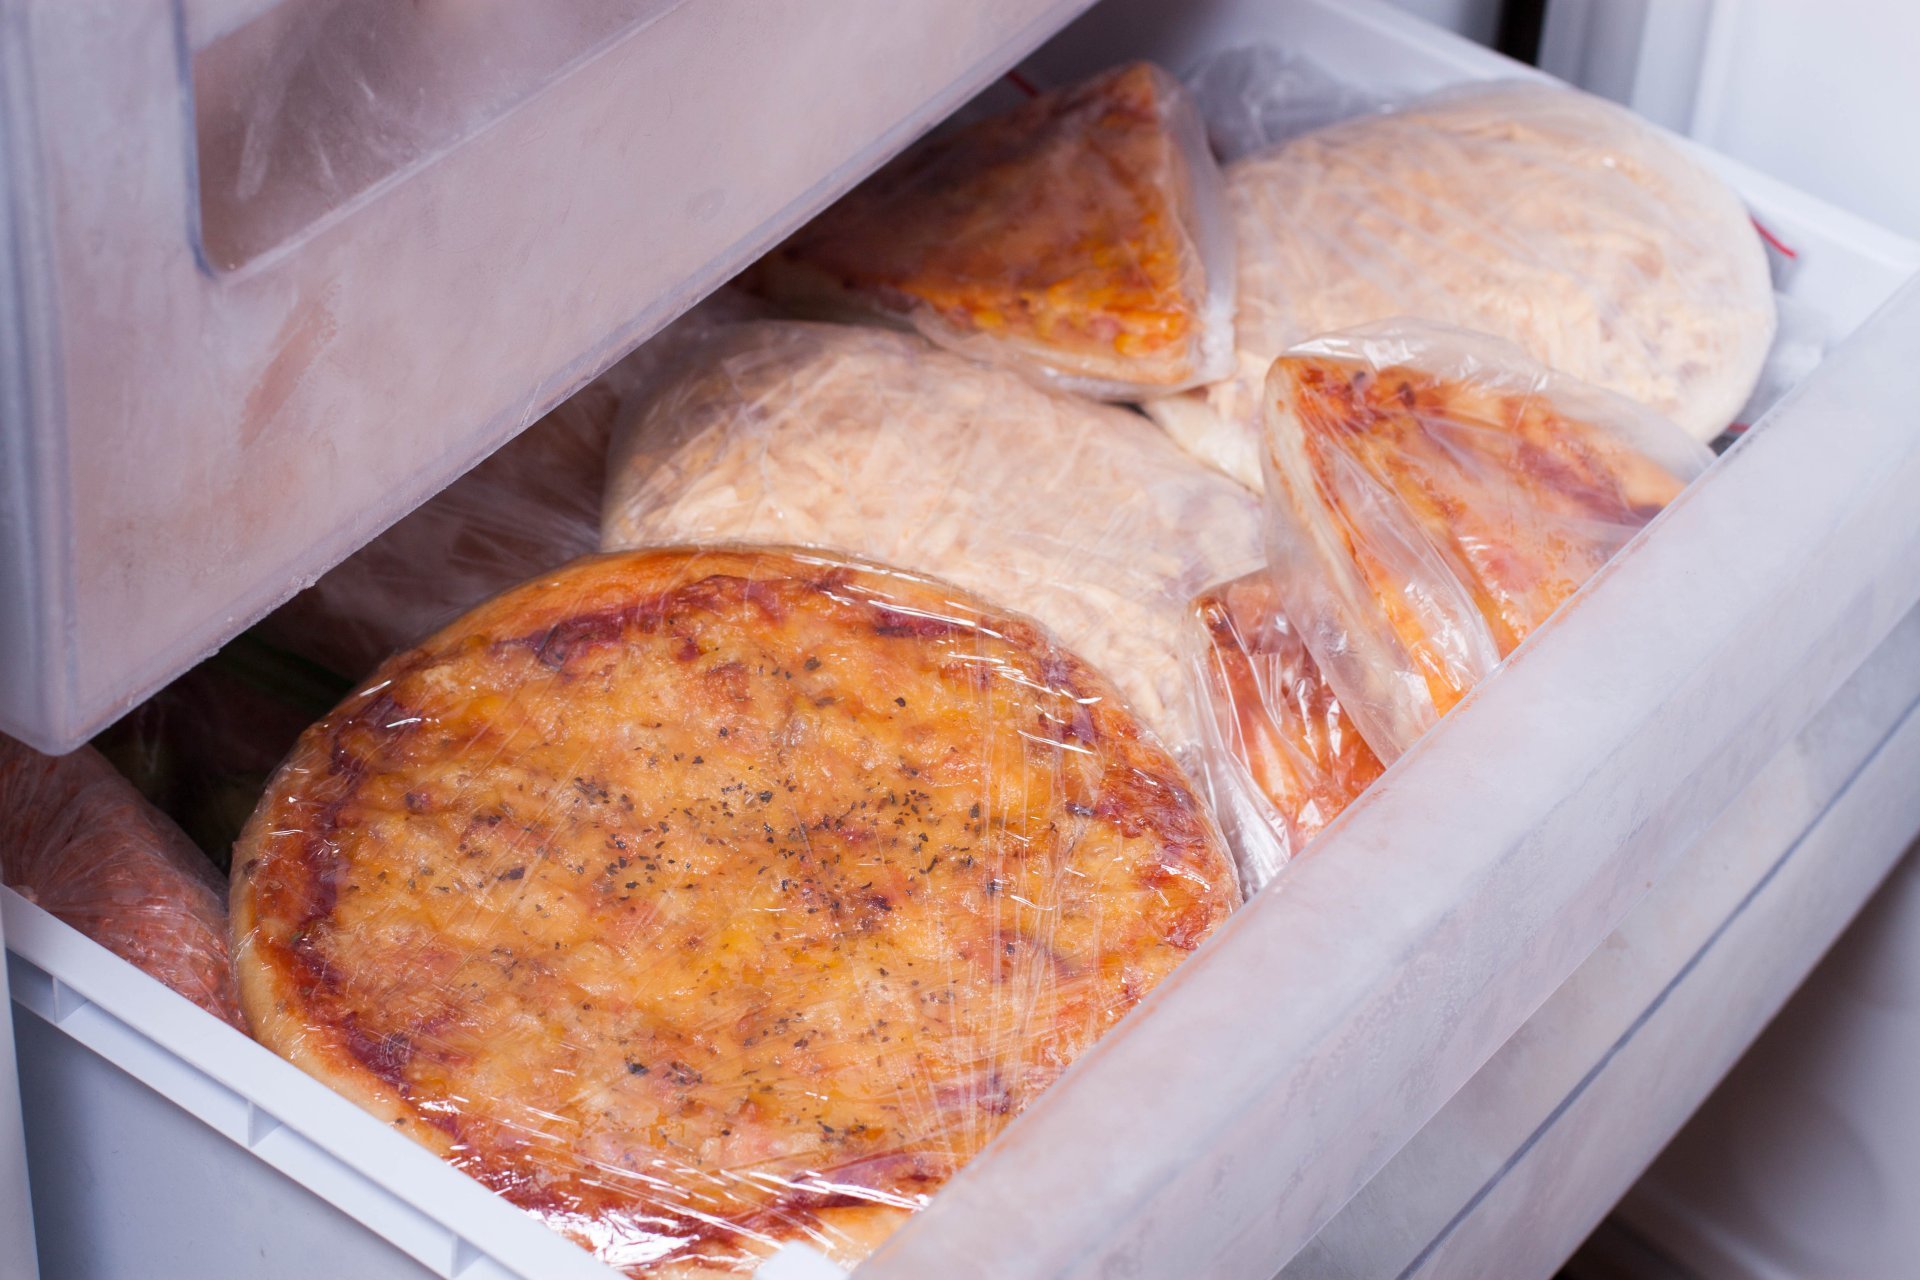 How To Store Pizza In Freezer